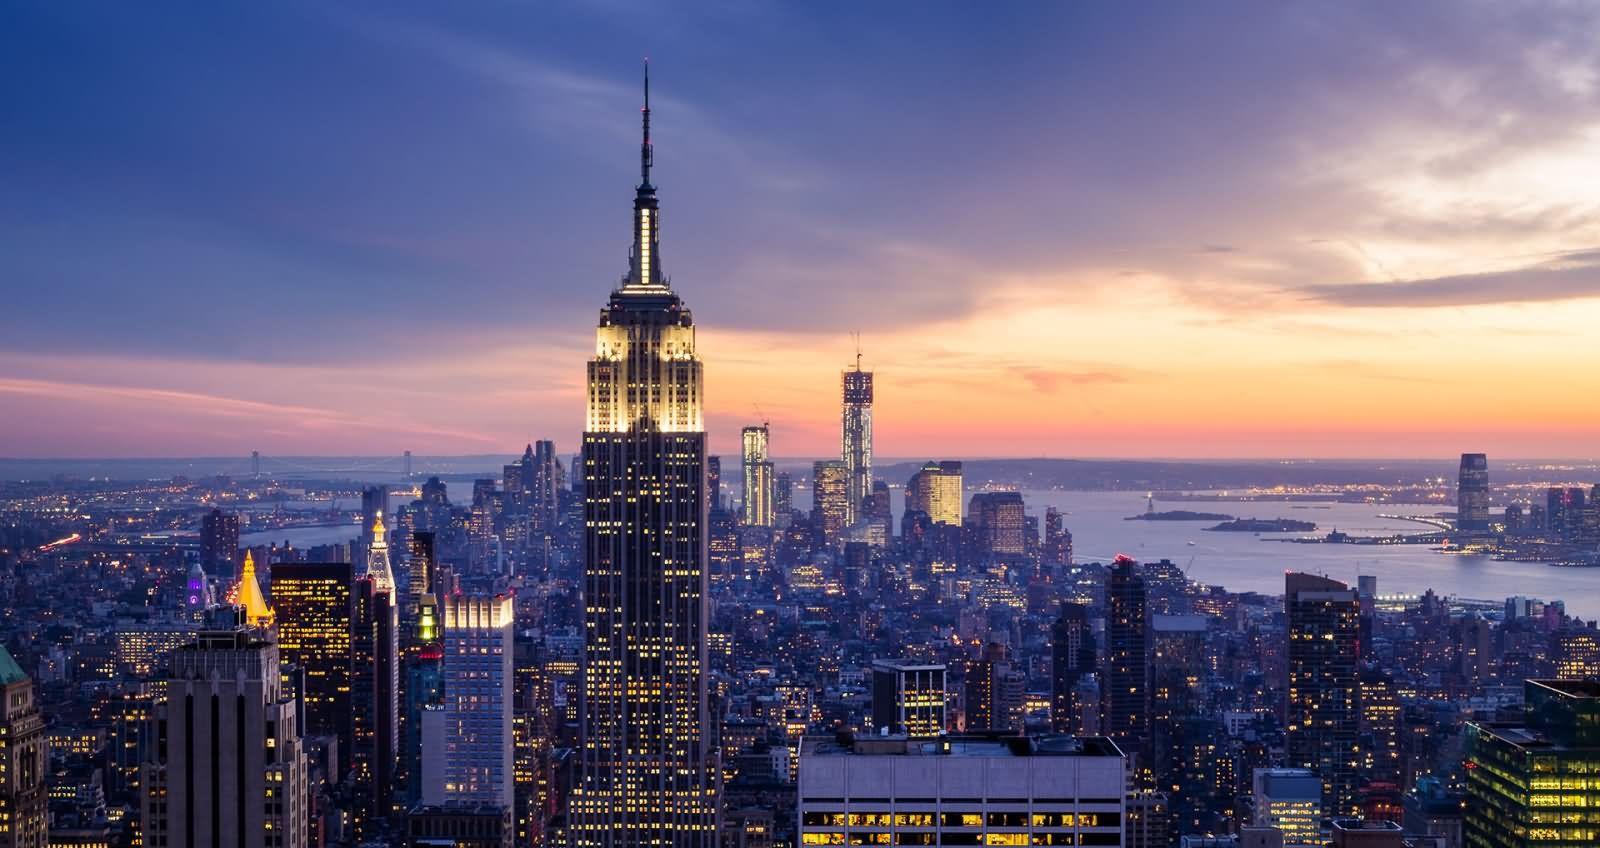 Most Adorable Empire State Building, Manhattan Night View